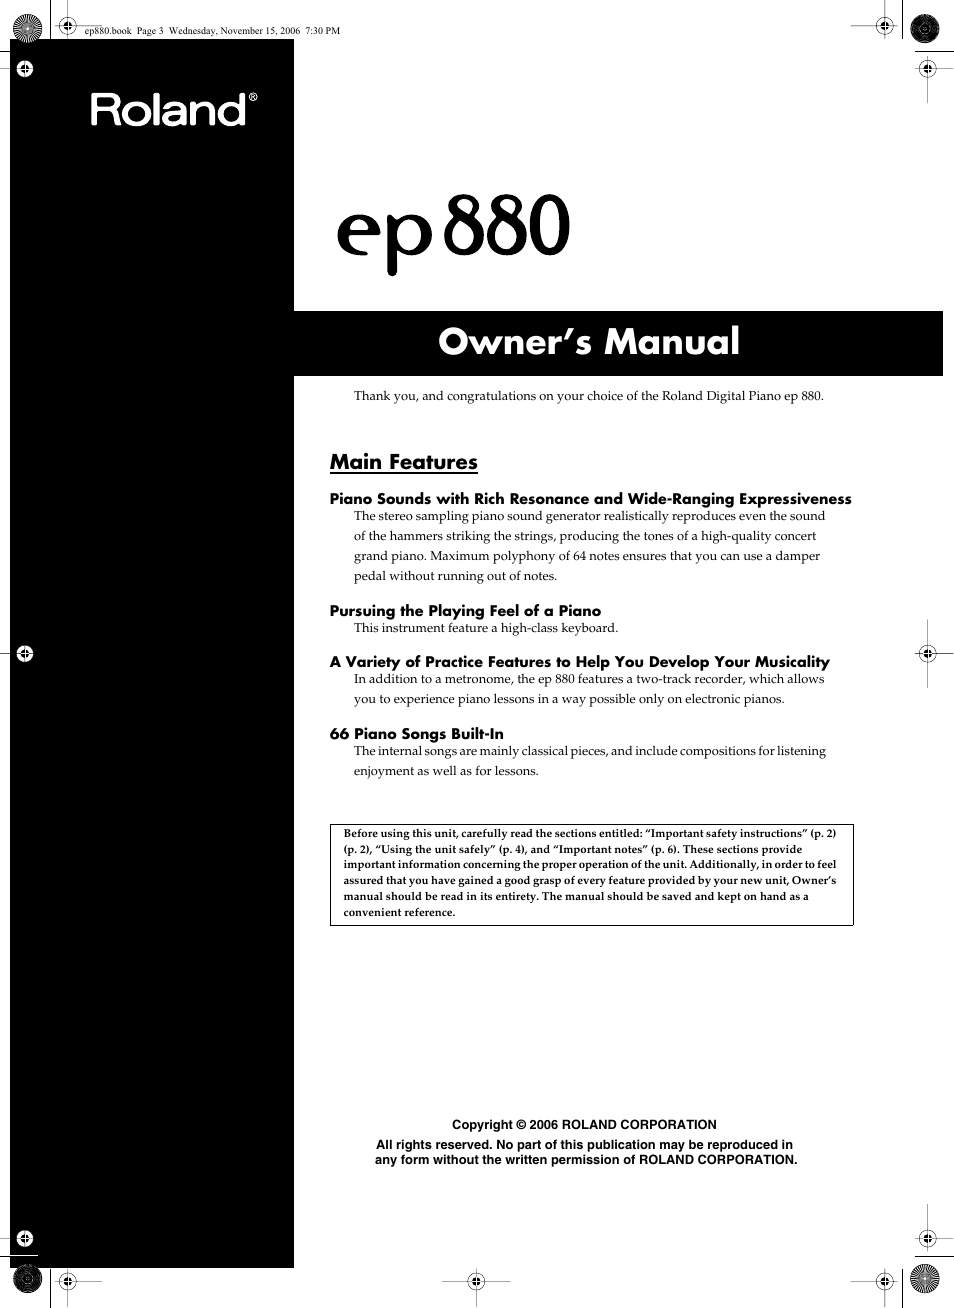 Owner’s manual, P. 3), Main features | Roland EP-880 User Manual | Page